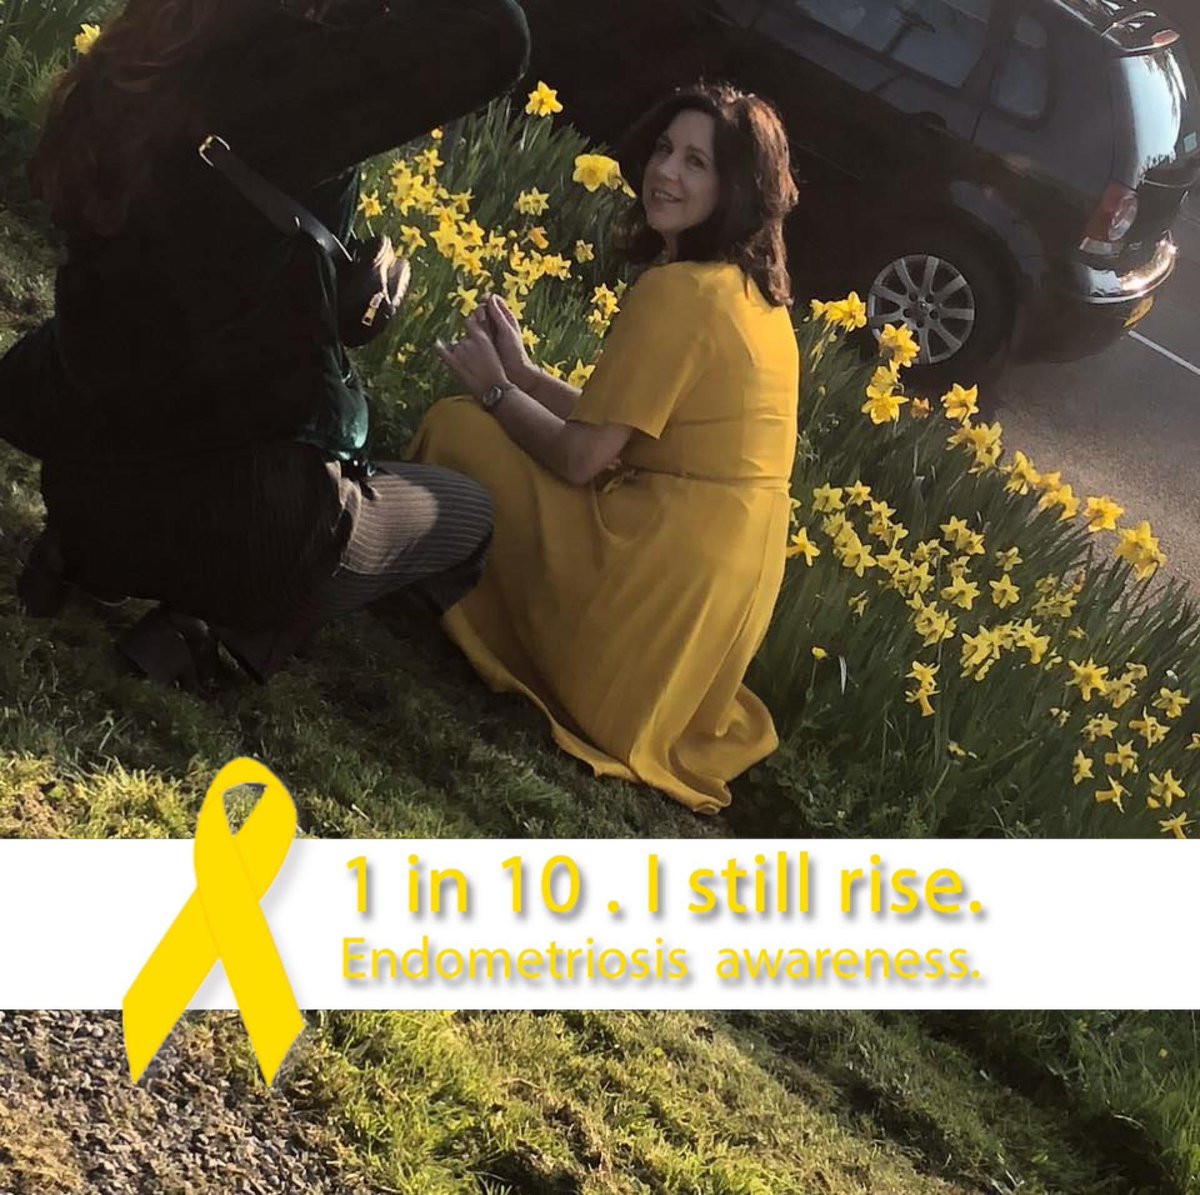 It’s #EndometriosisAwarenessMonth and Mummy will be posting quite a bit about this awful disease #1in10